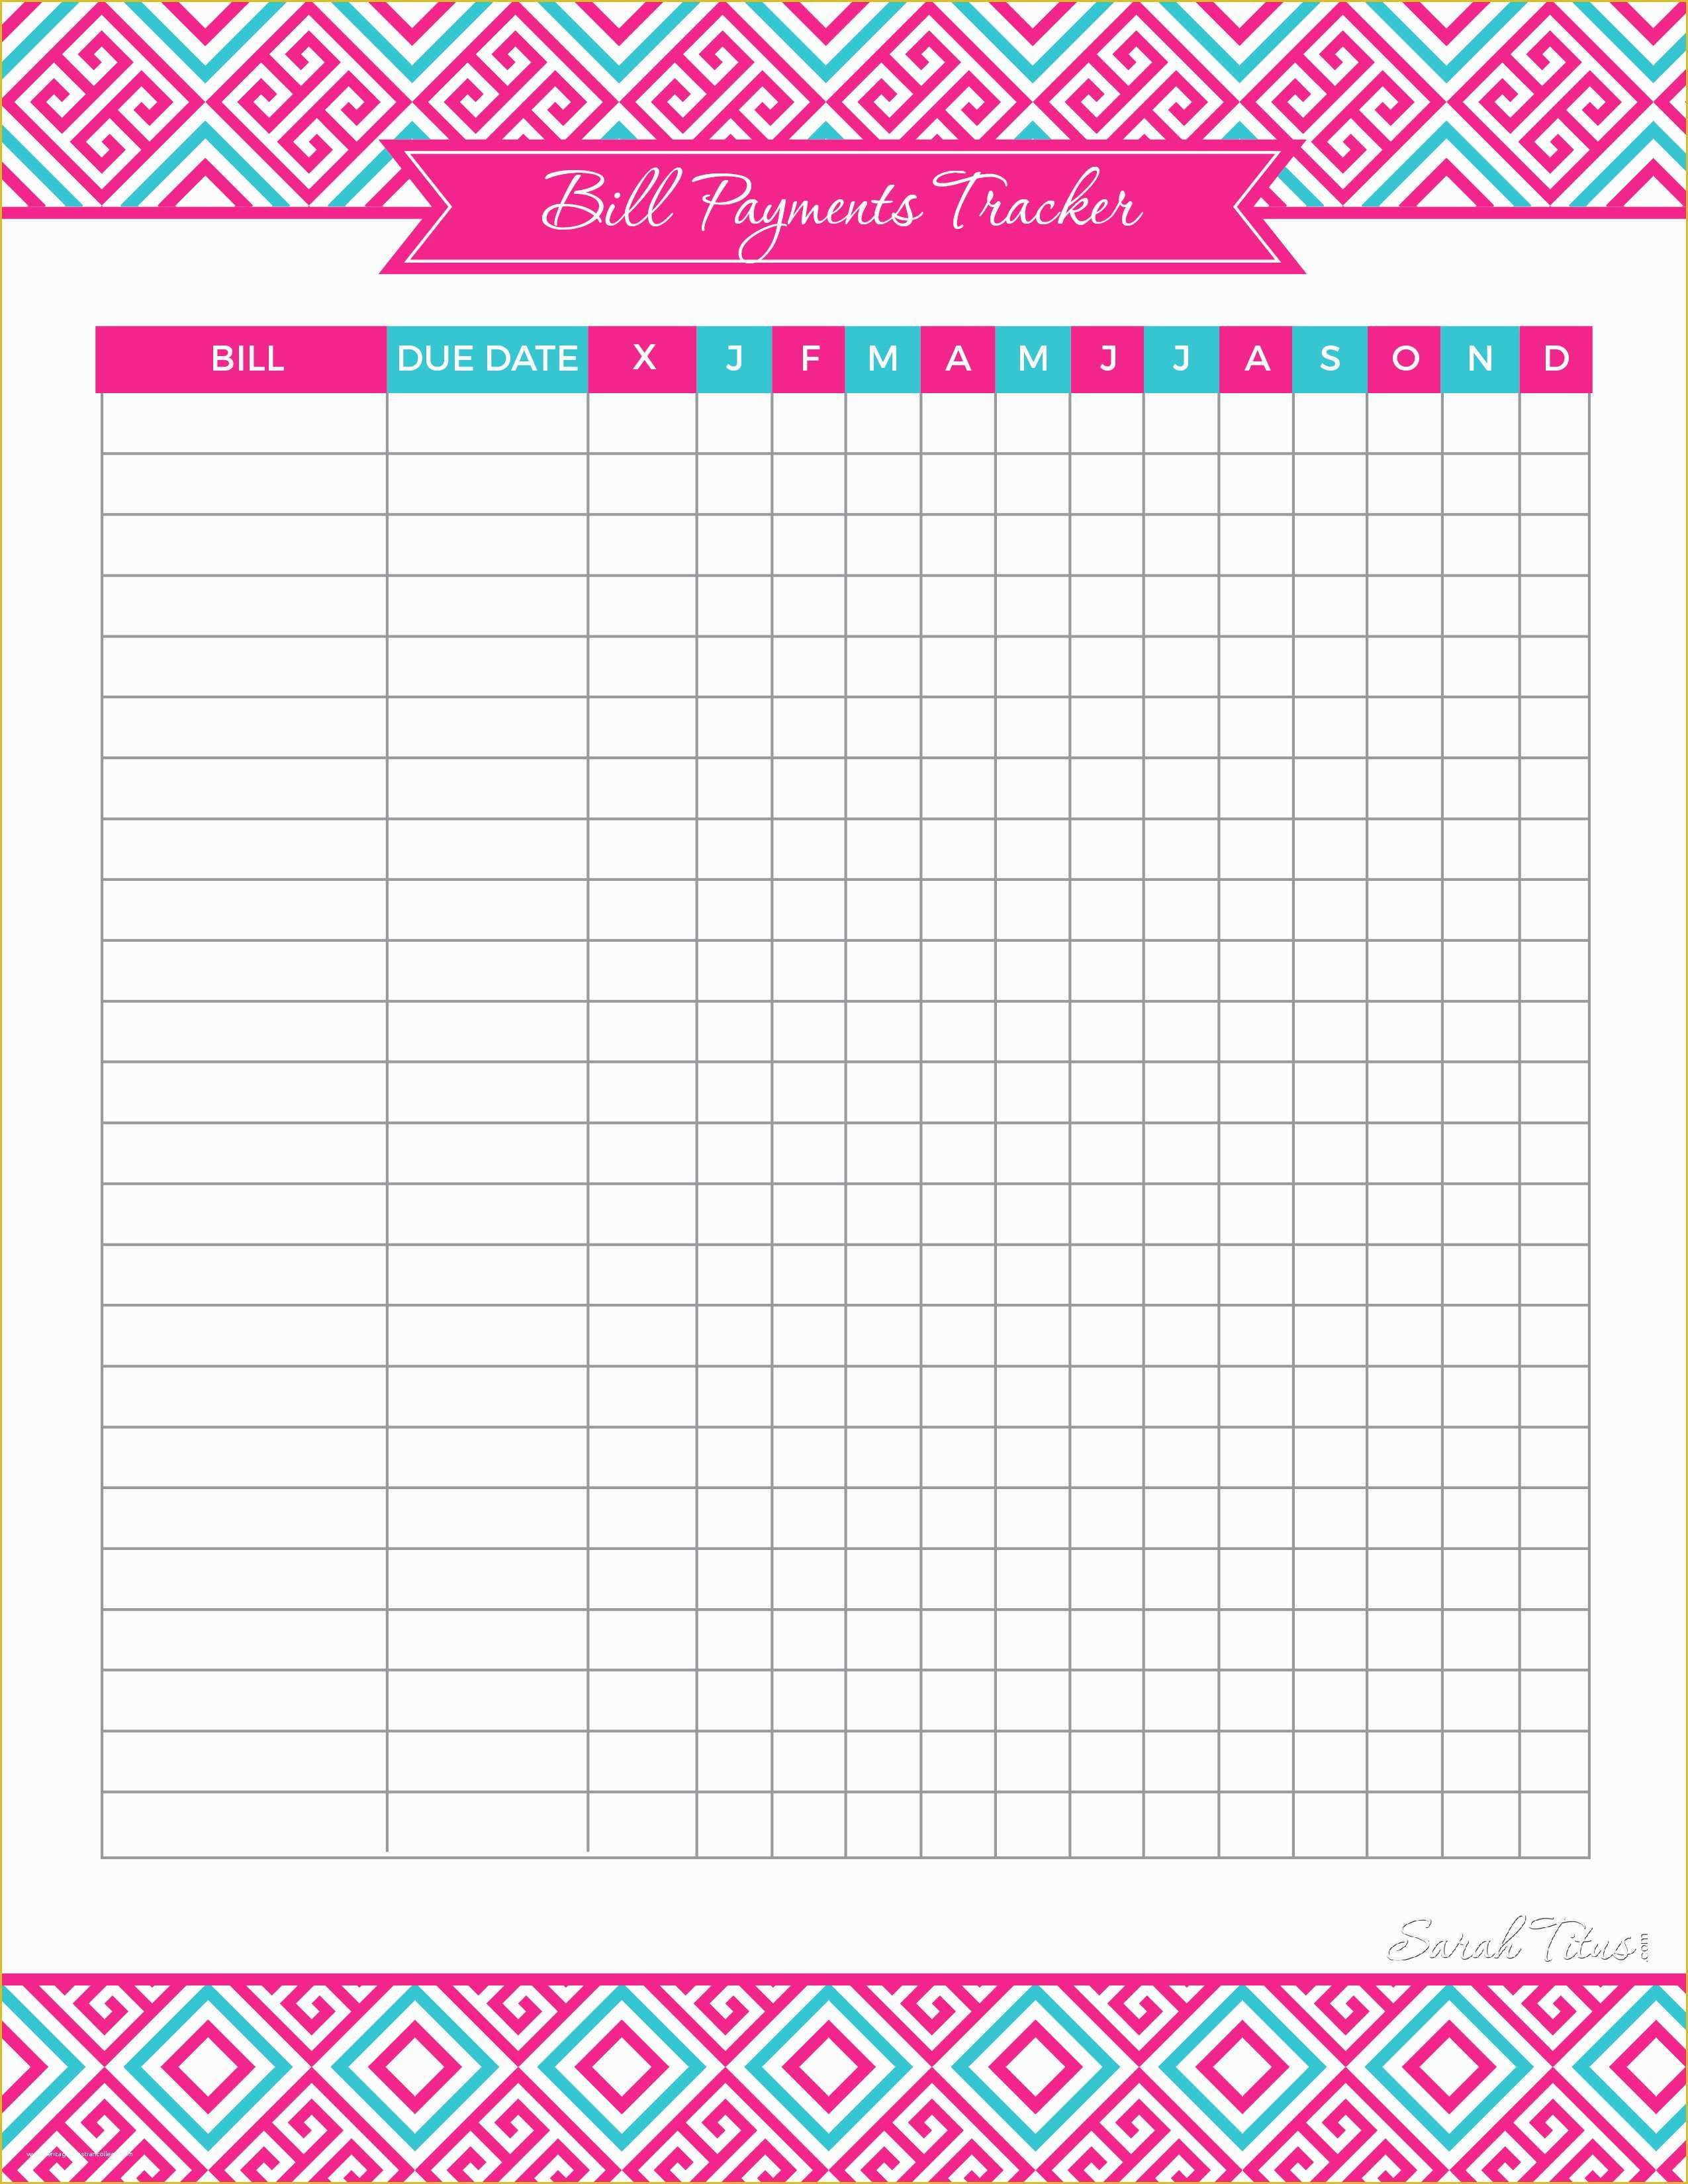 Bill Tracker Template Free Of Household Binder Bill Payments Tracker Sarah Titus